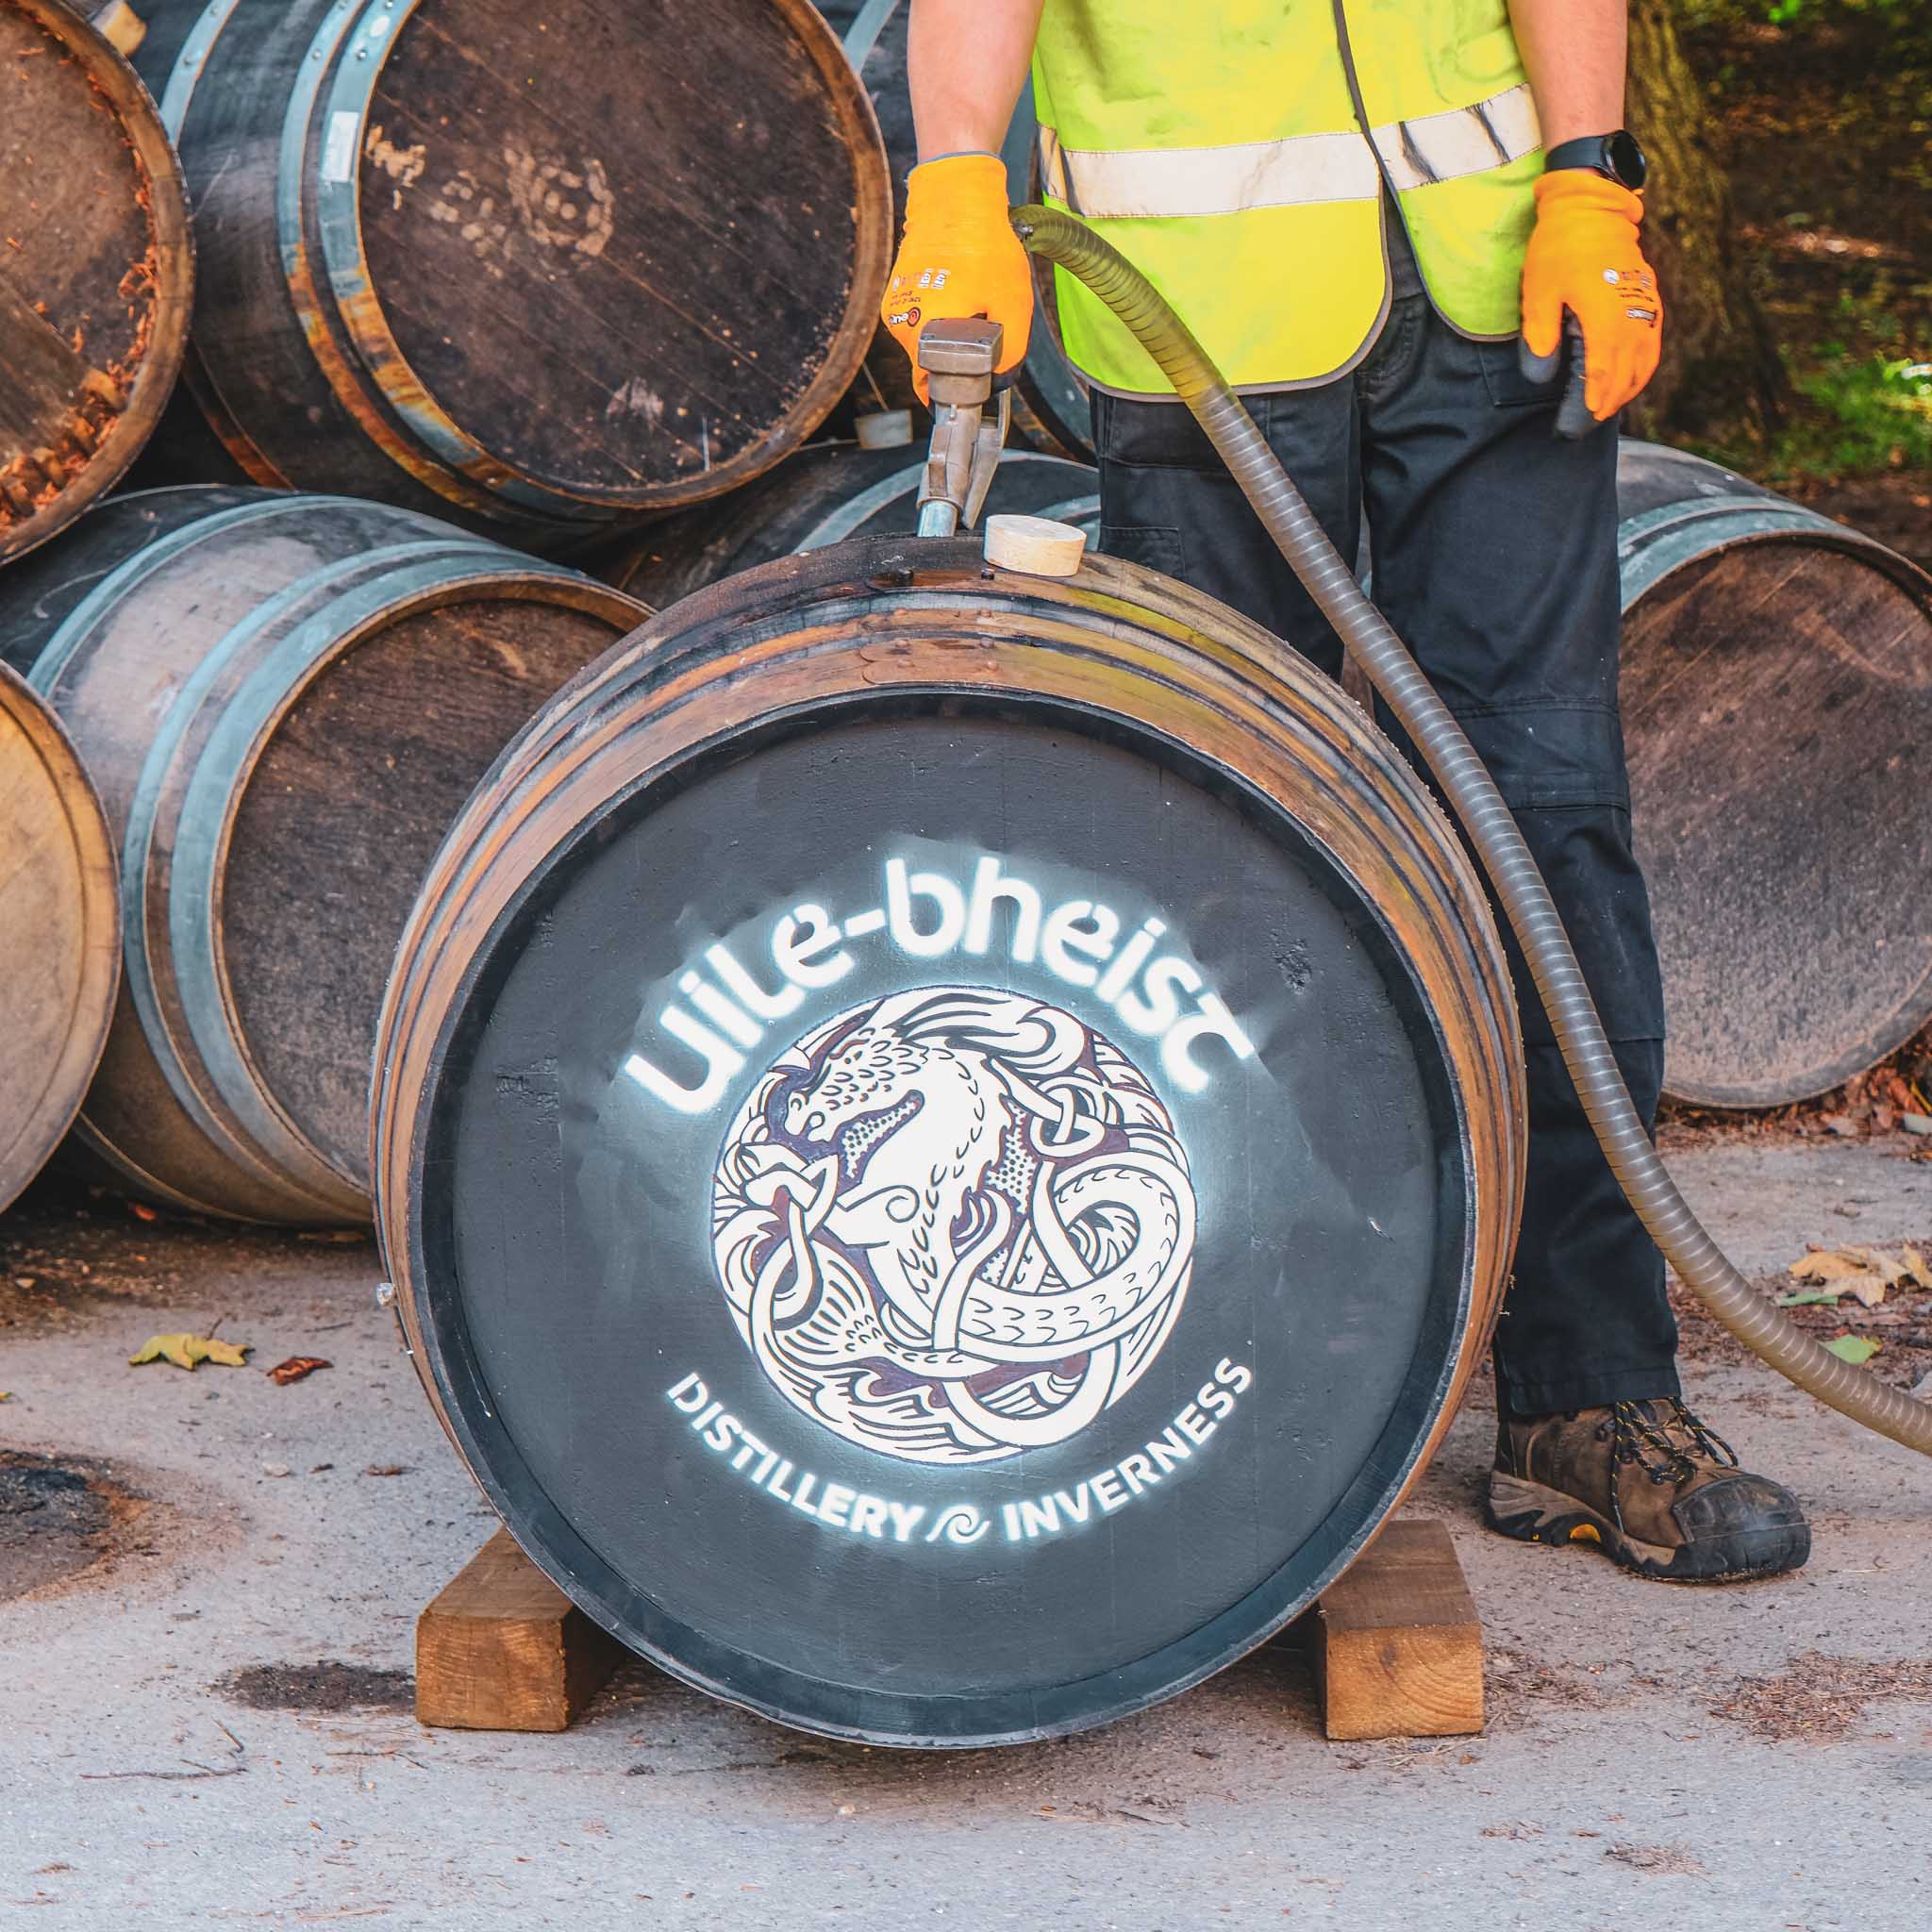 Filling a whisky cask with spirit, there is a logo of Uile-bheist